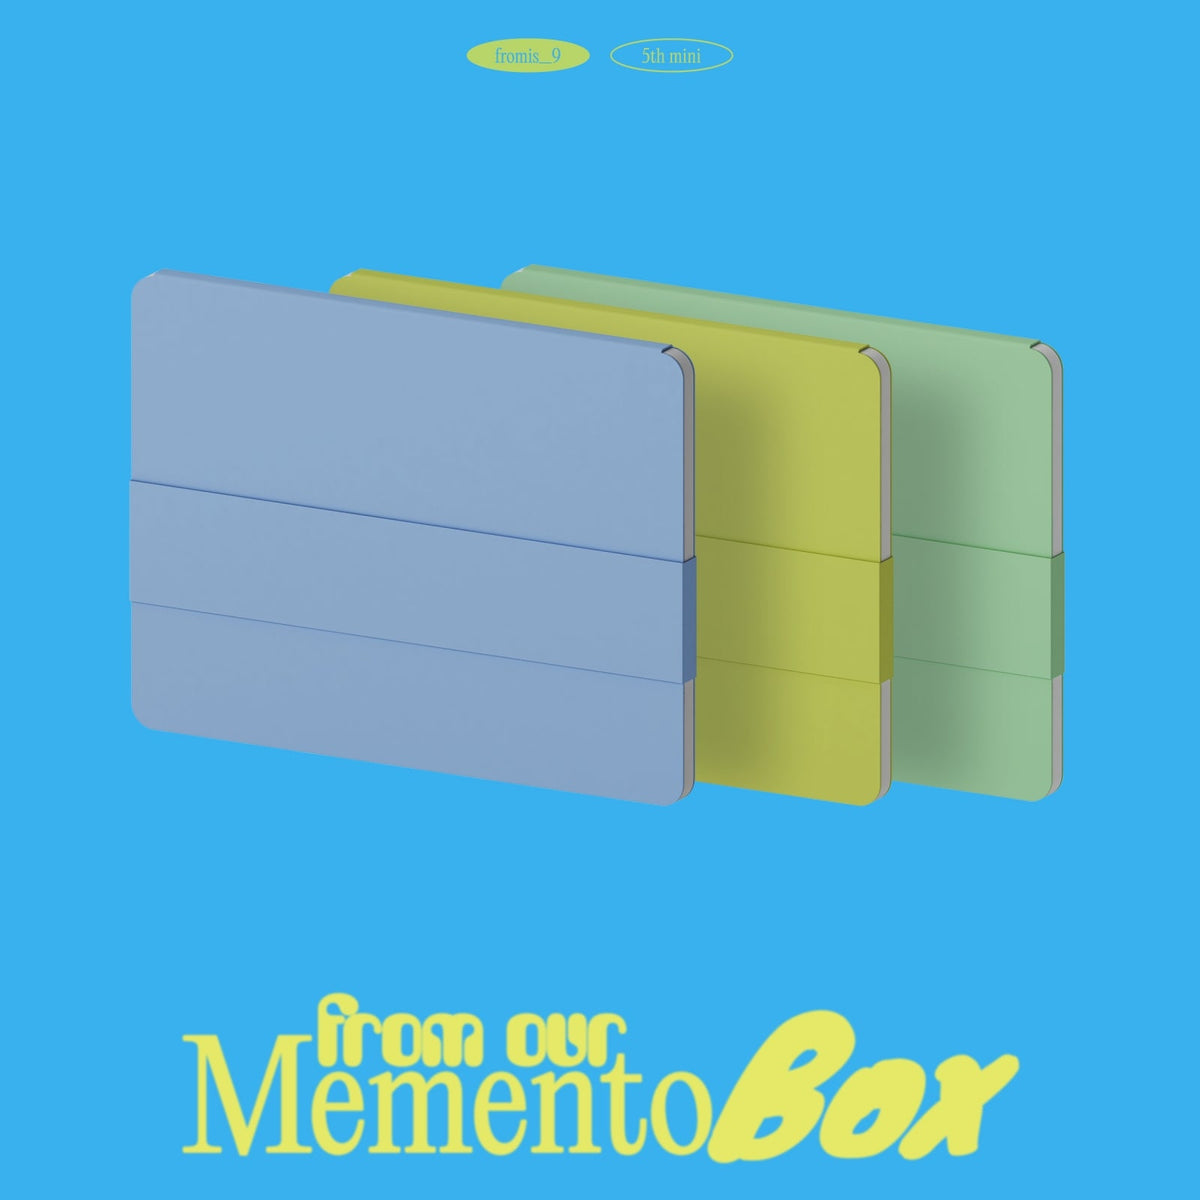 [PRE-ORDER] Fromis 9 - from our Memento Box / 5th Mini Album